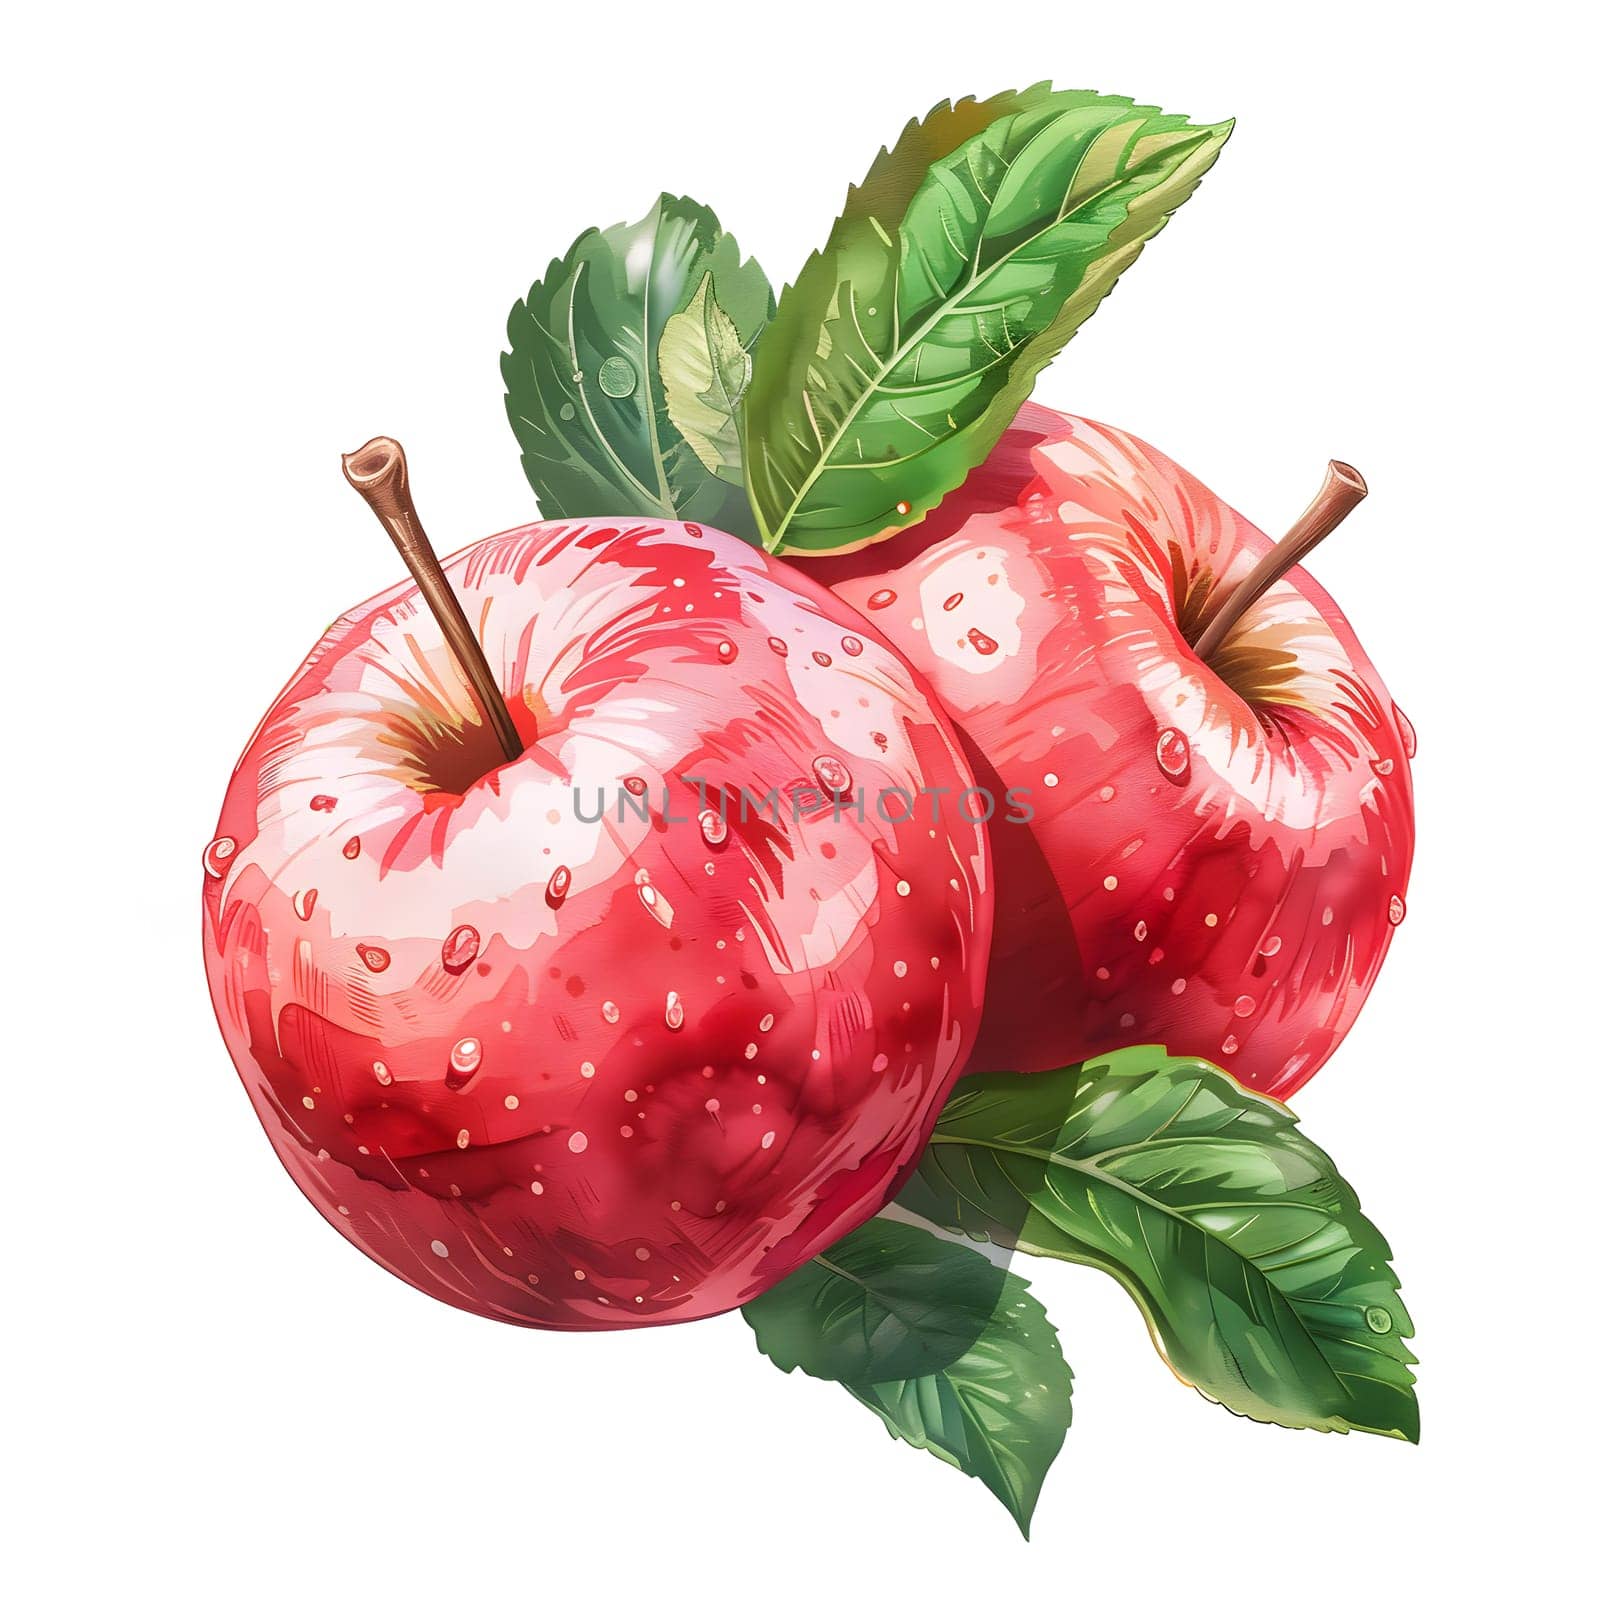 Two seedless red apples with green leaves, a type of accessory fruit from a flowering plant tree, known for being a superfood and a popular ingredient in various natural foods and produce